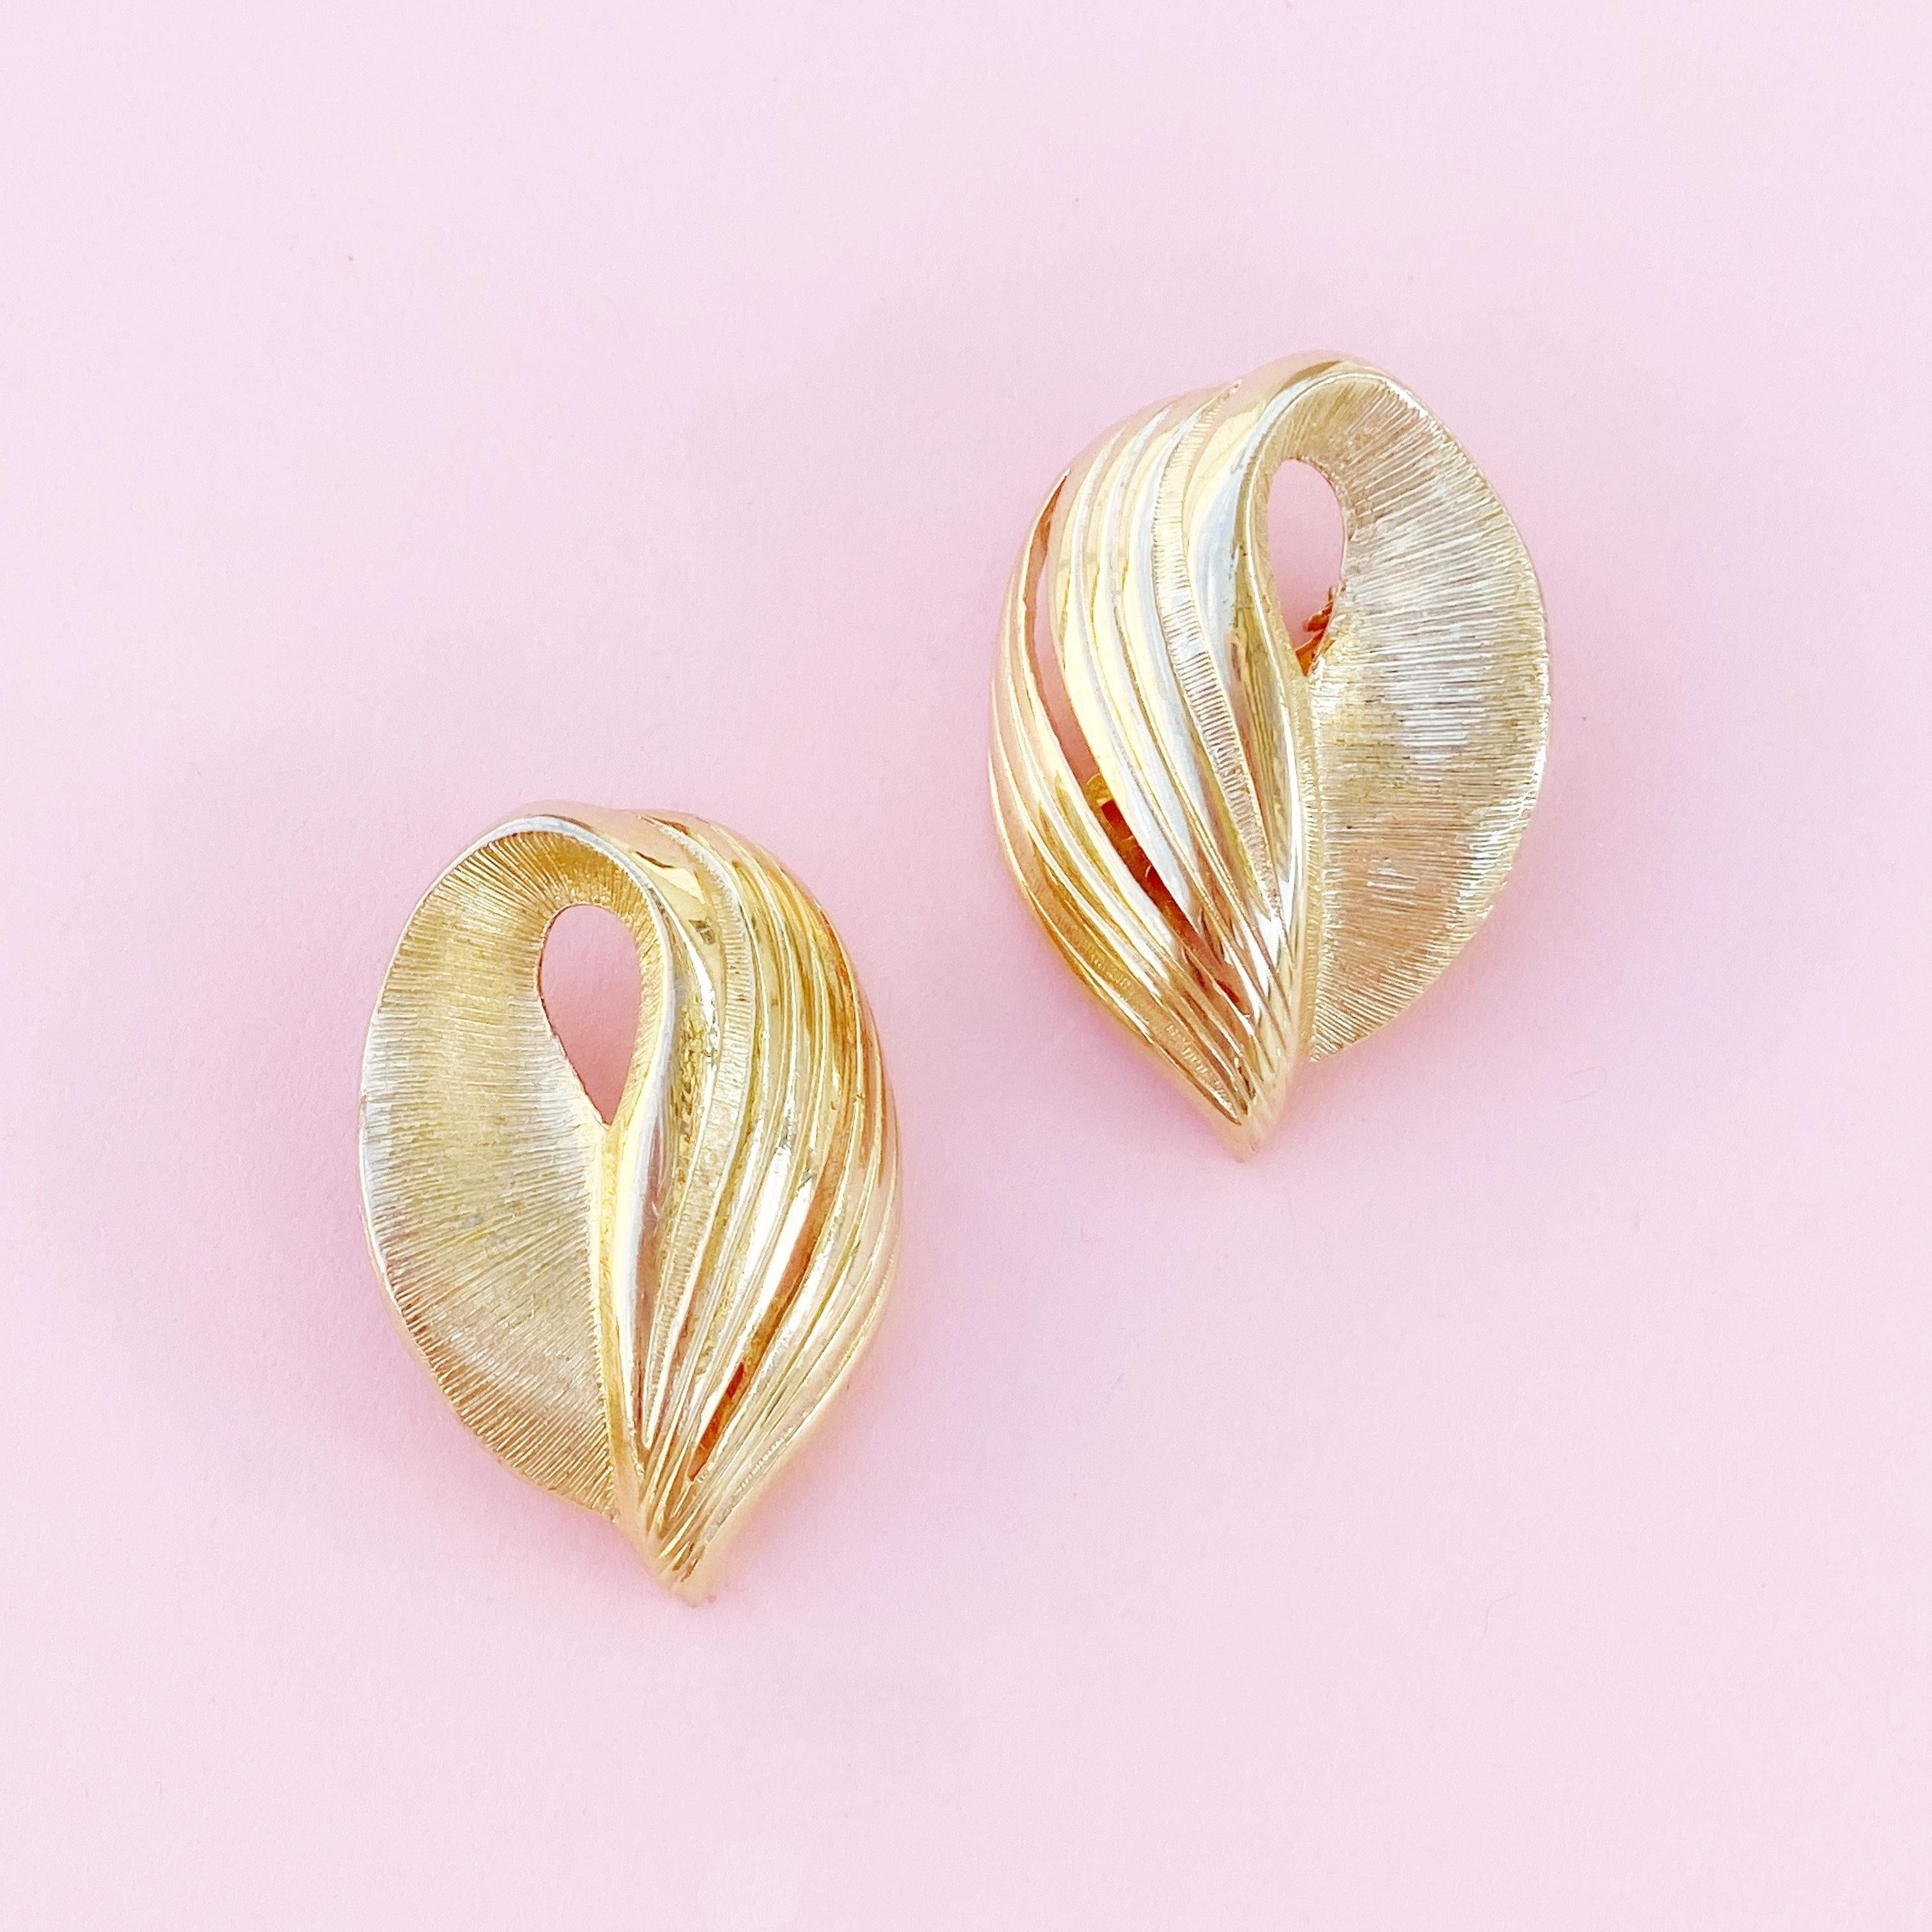 Gilded Textured Abstract Leaf Earrings, 1980s For Sale 1